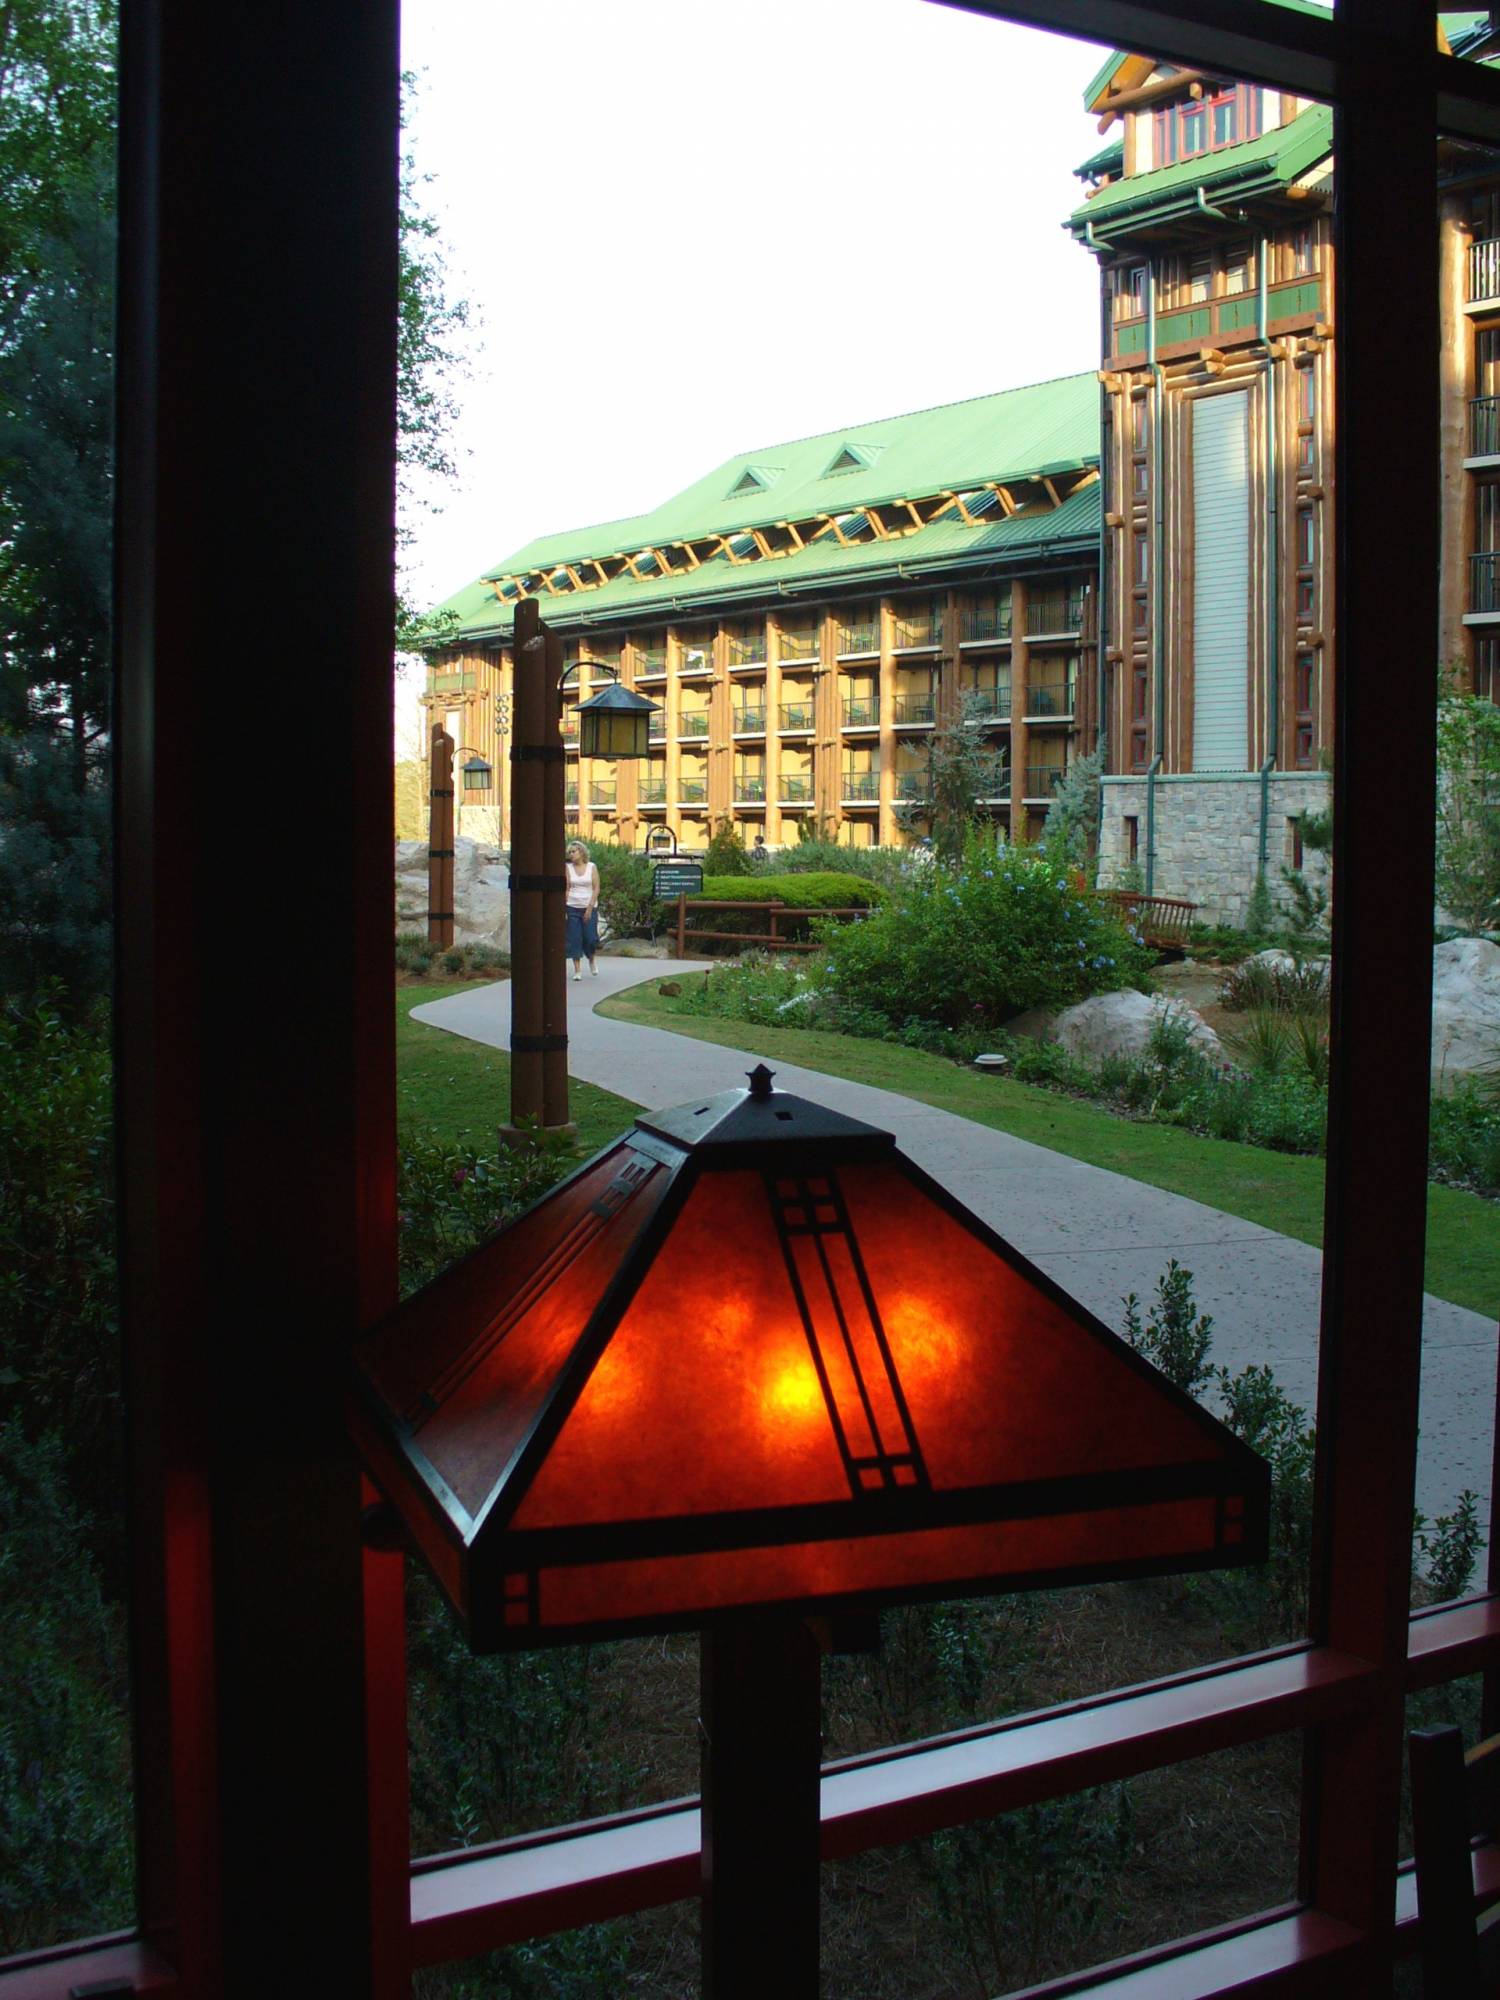 Wilderness Lodge - Lobby and Courtyard